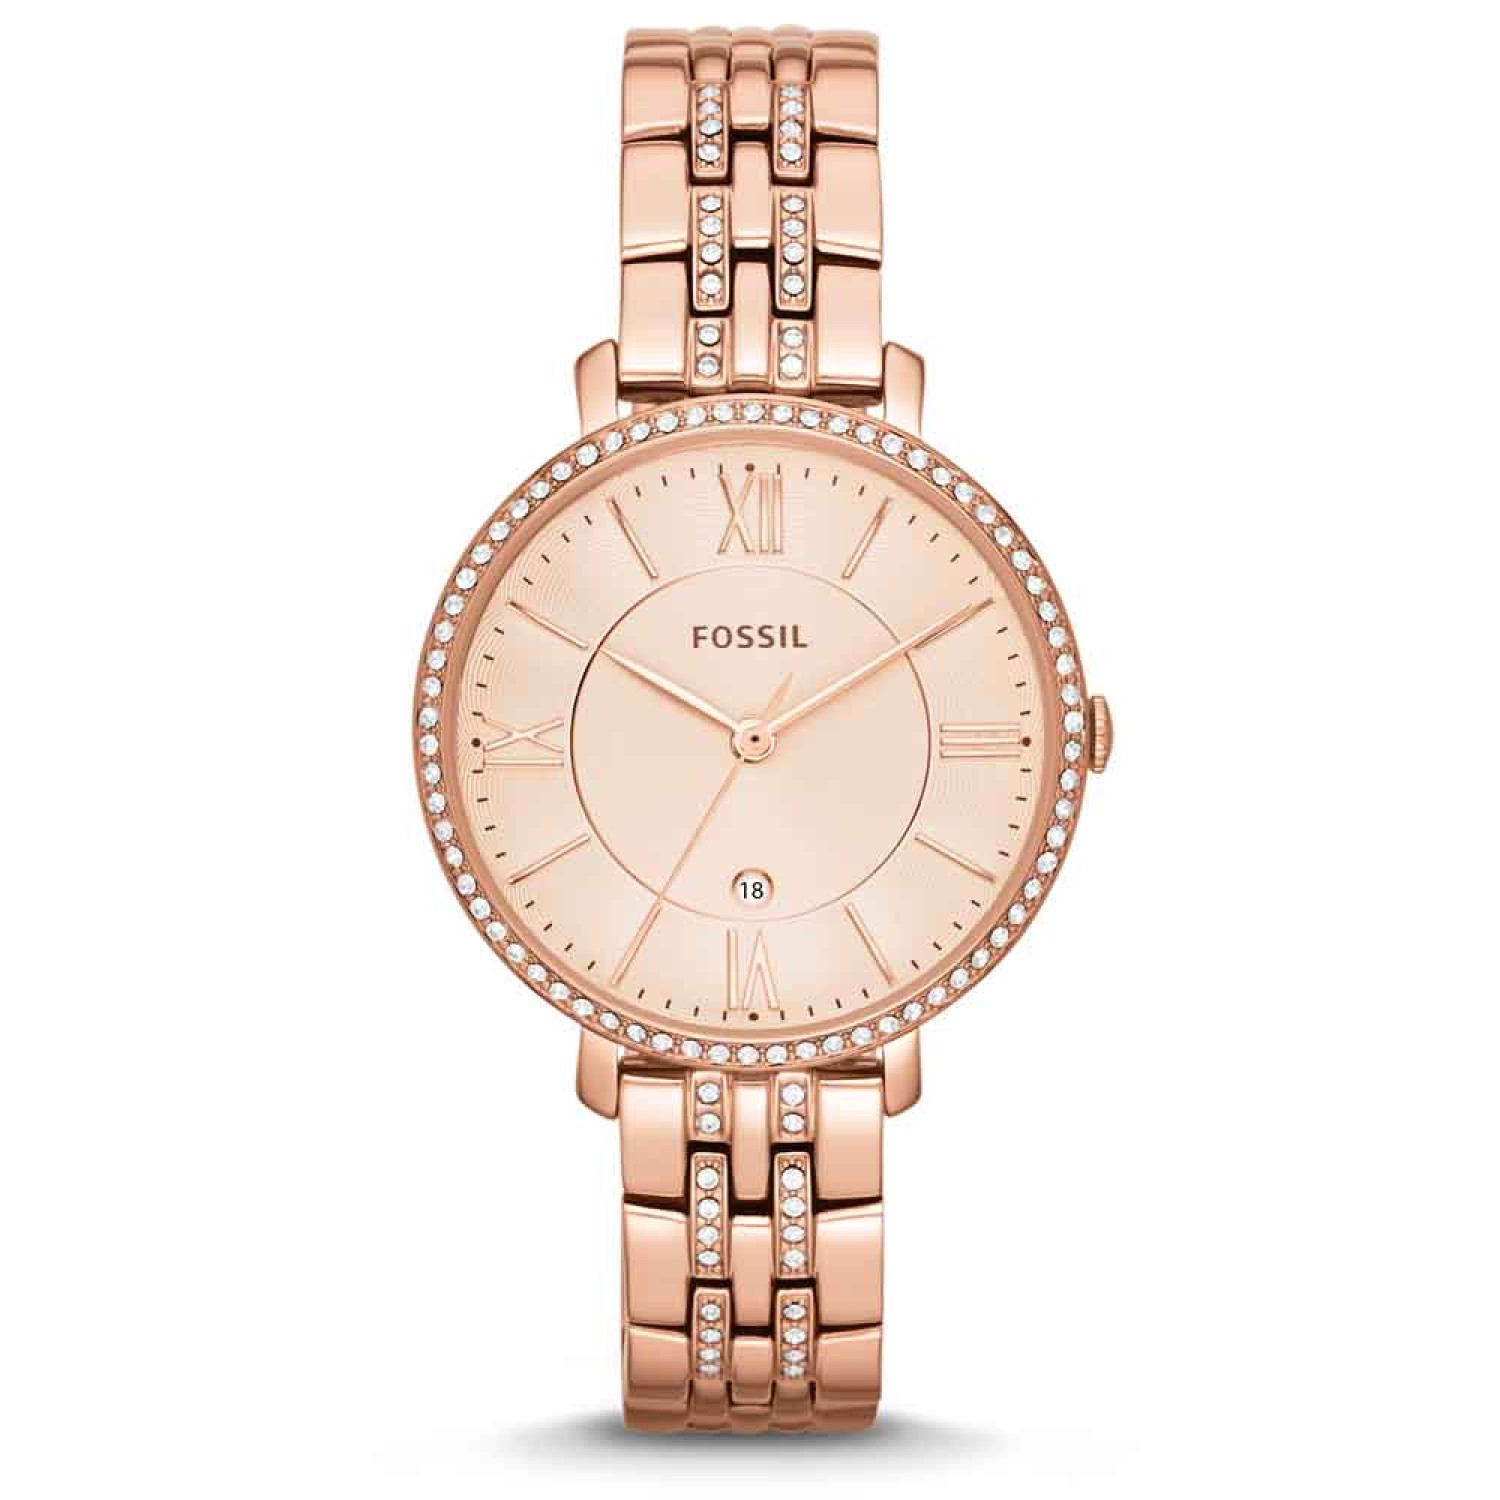 ES3546 Fossil Jacqueline Rose-Tone  Watch fossil smart watches nz